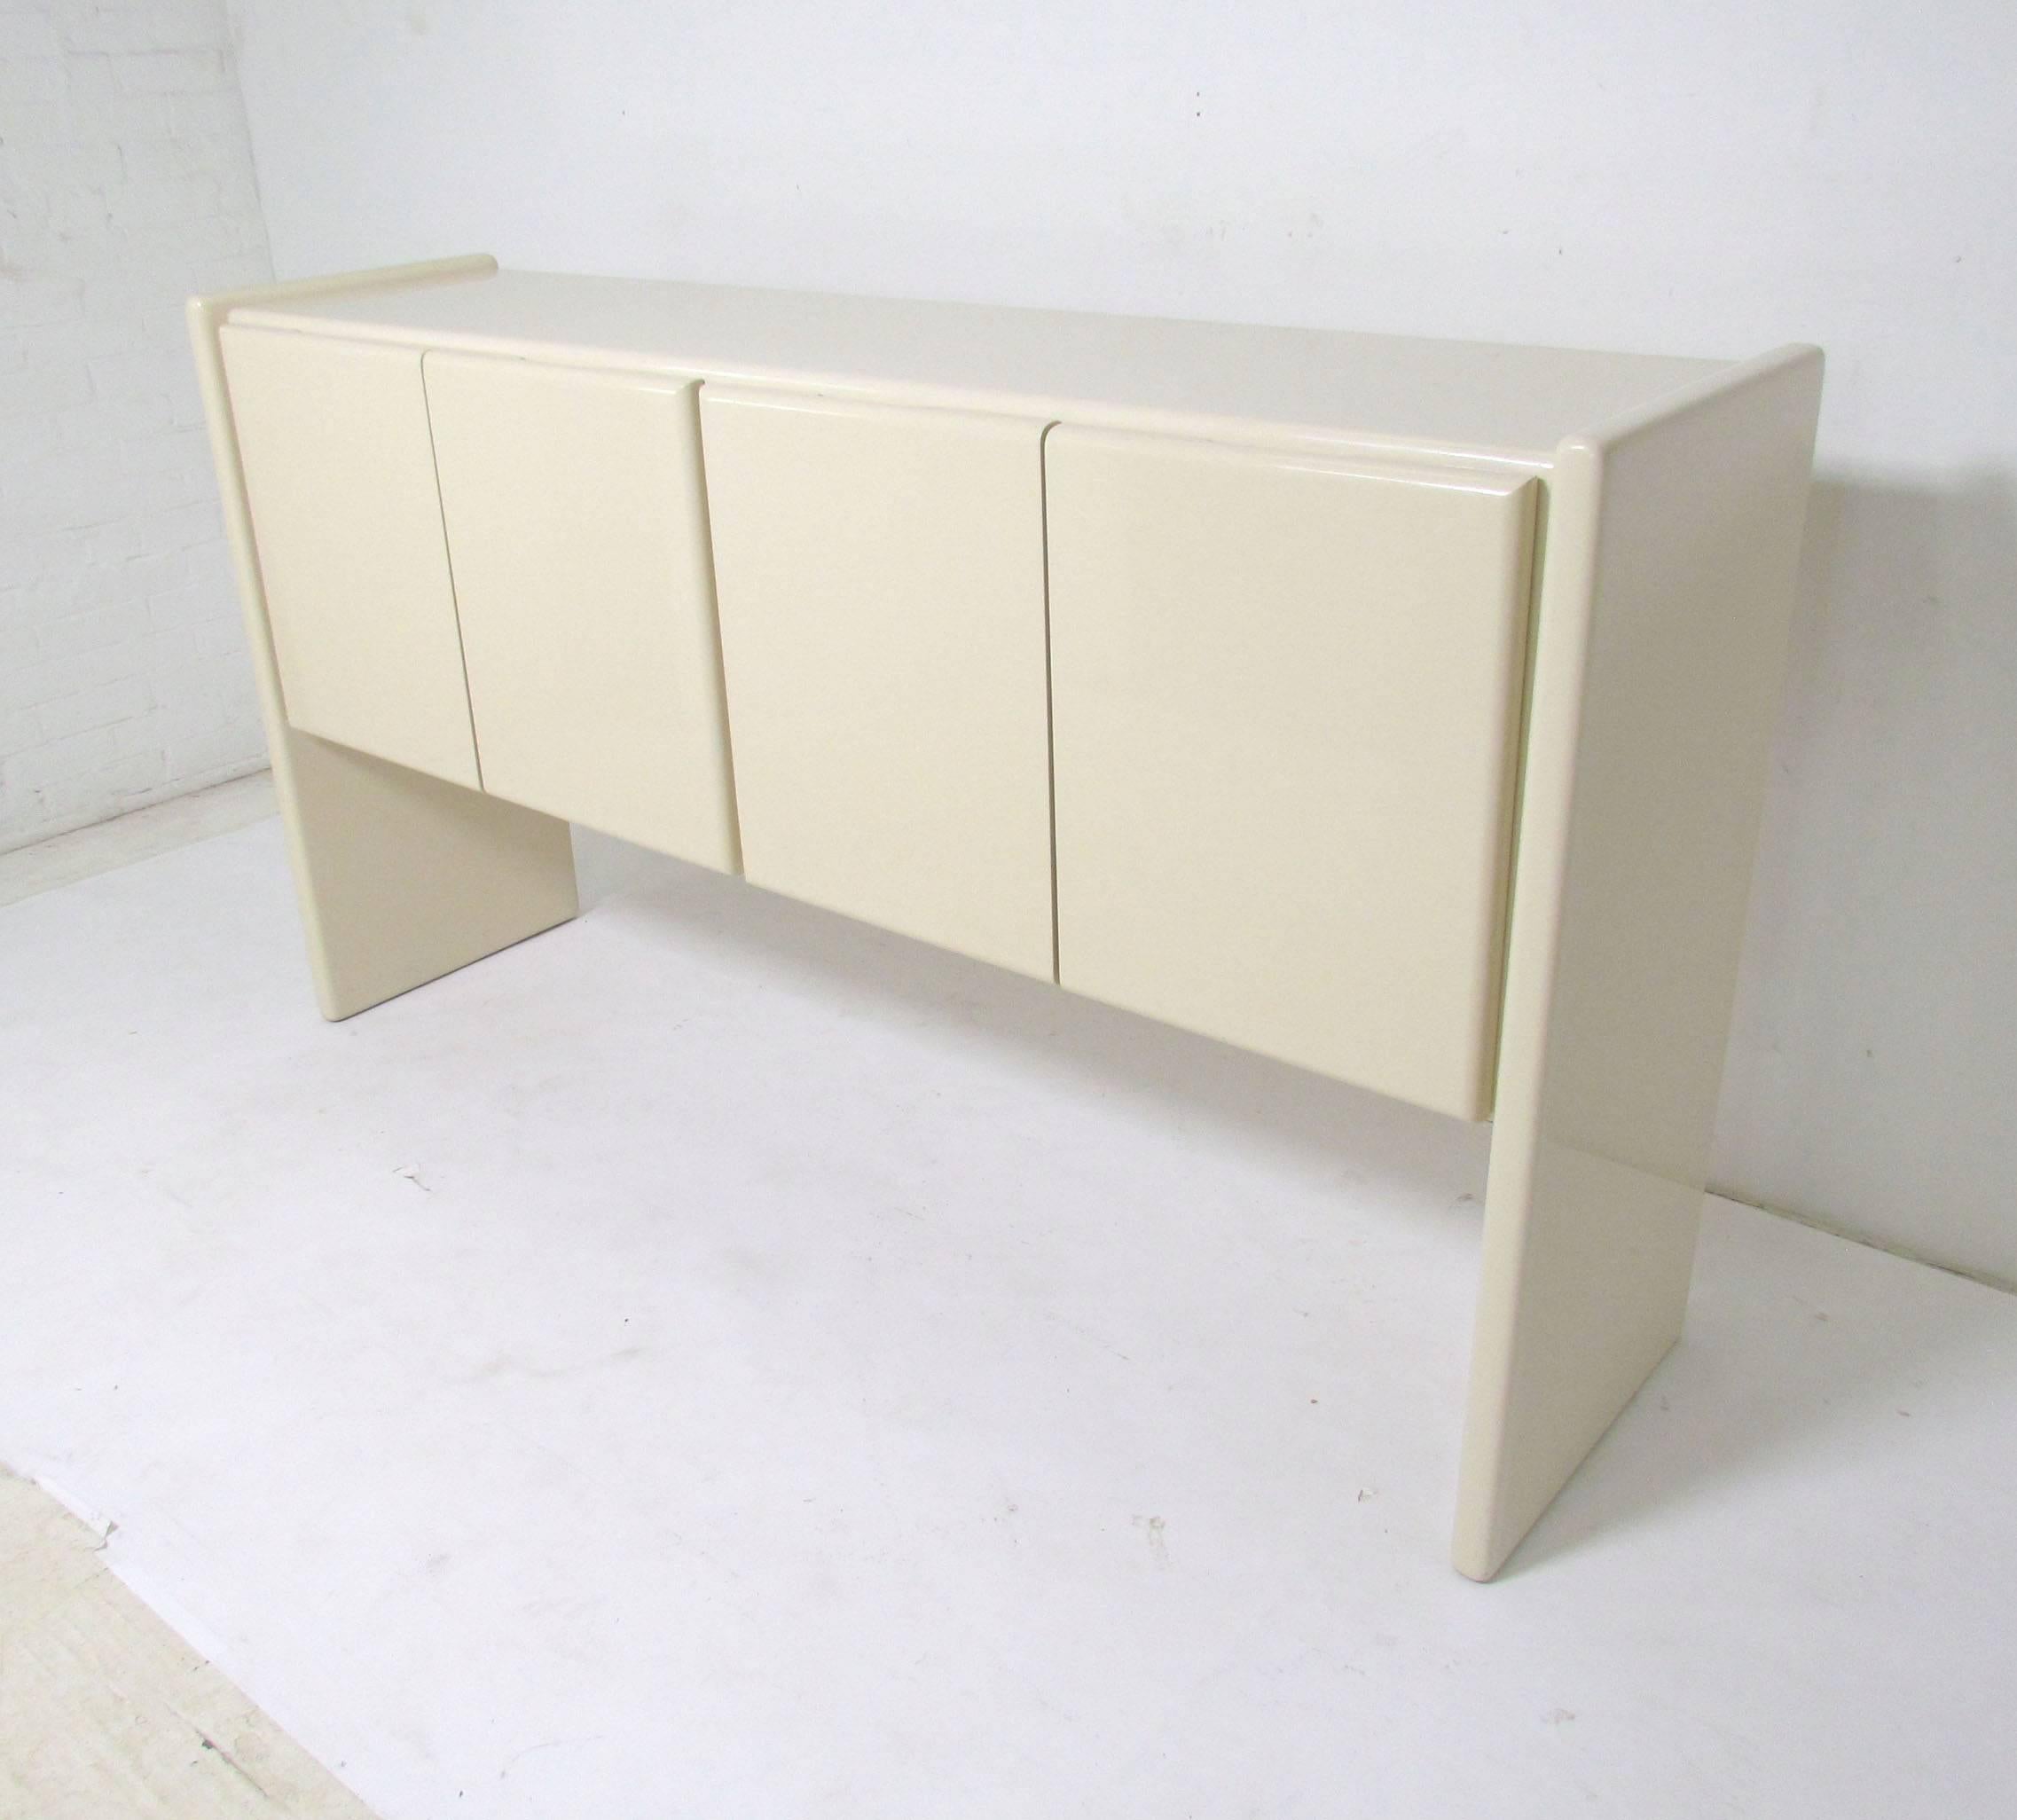 Mid-Century American modern sideboard by Milo Baughman for Thayer Coggin in original ivory high gloss lacquer finish, circa 1970s.